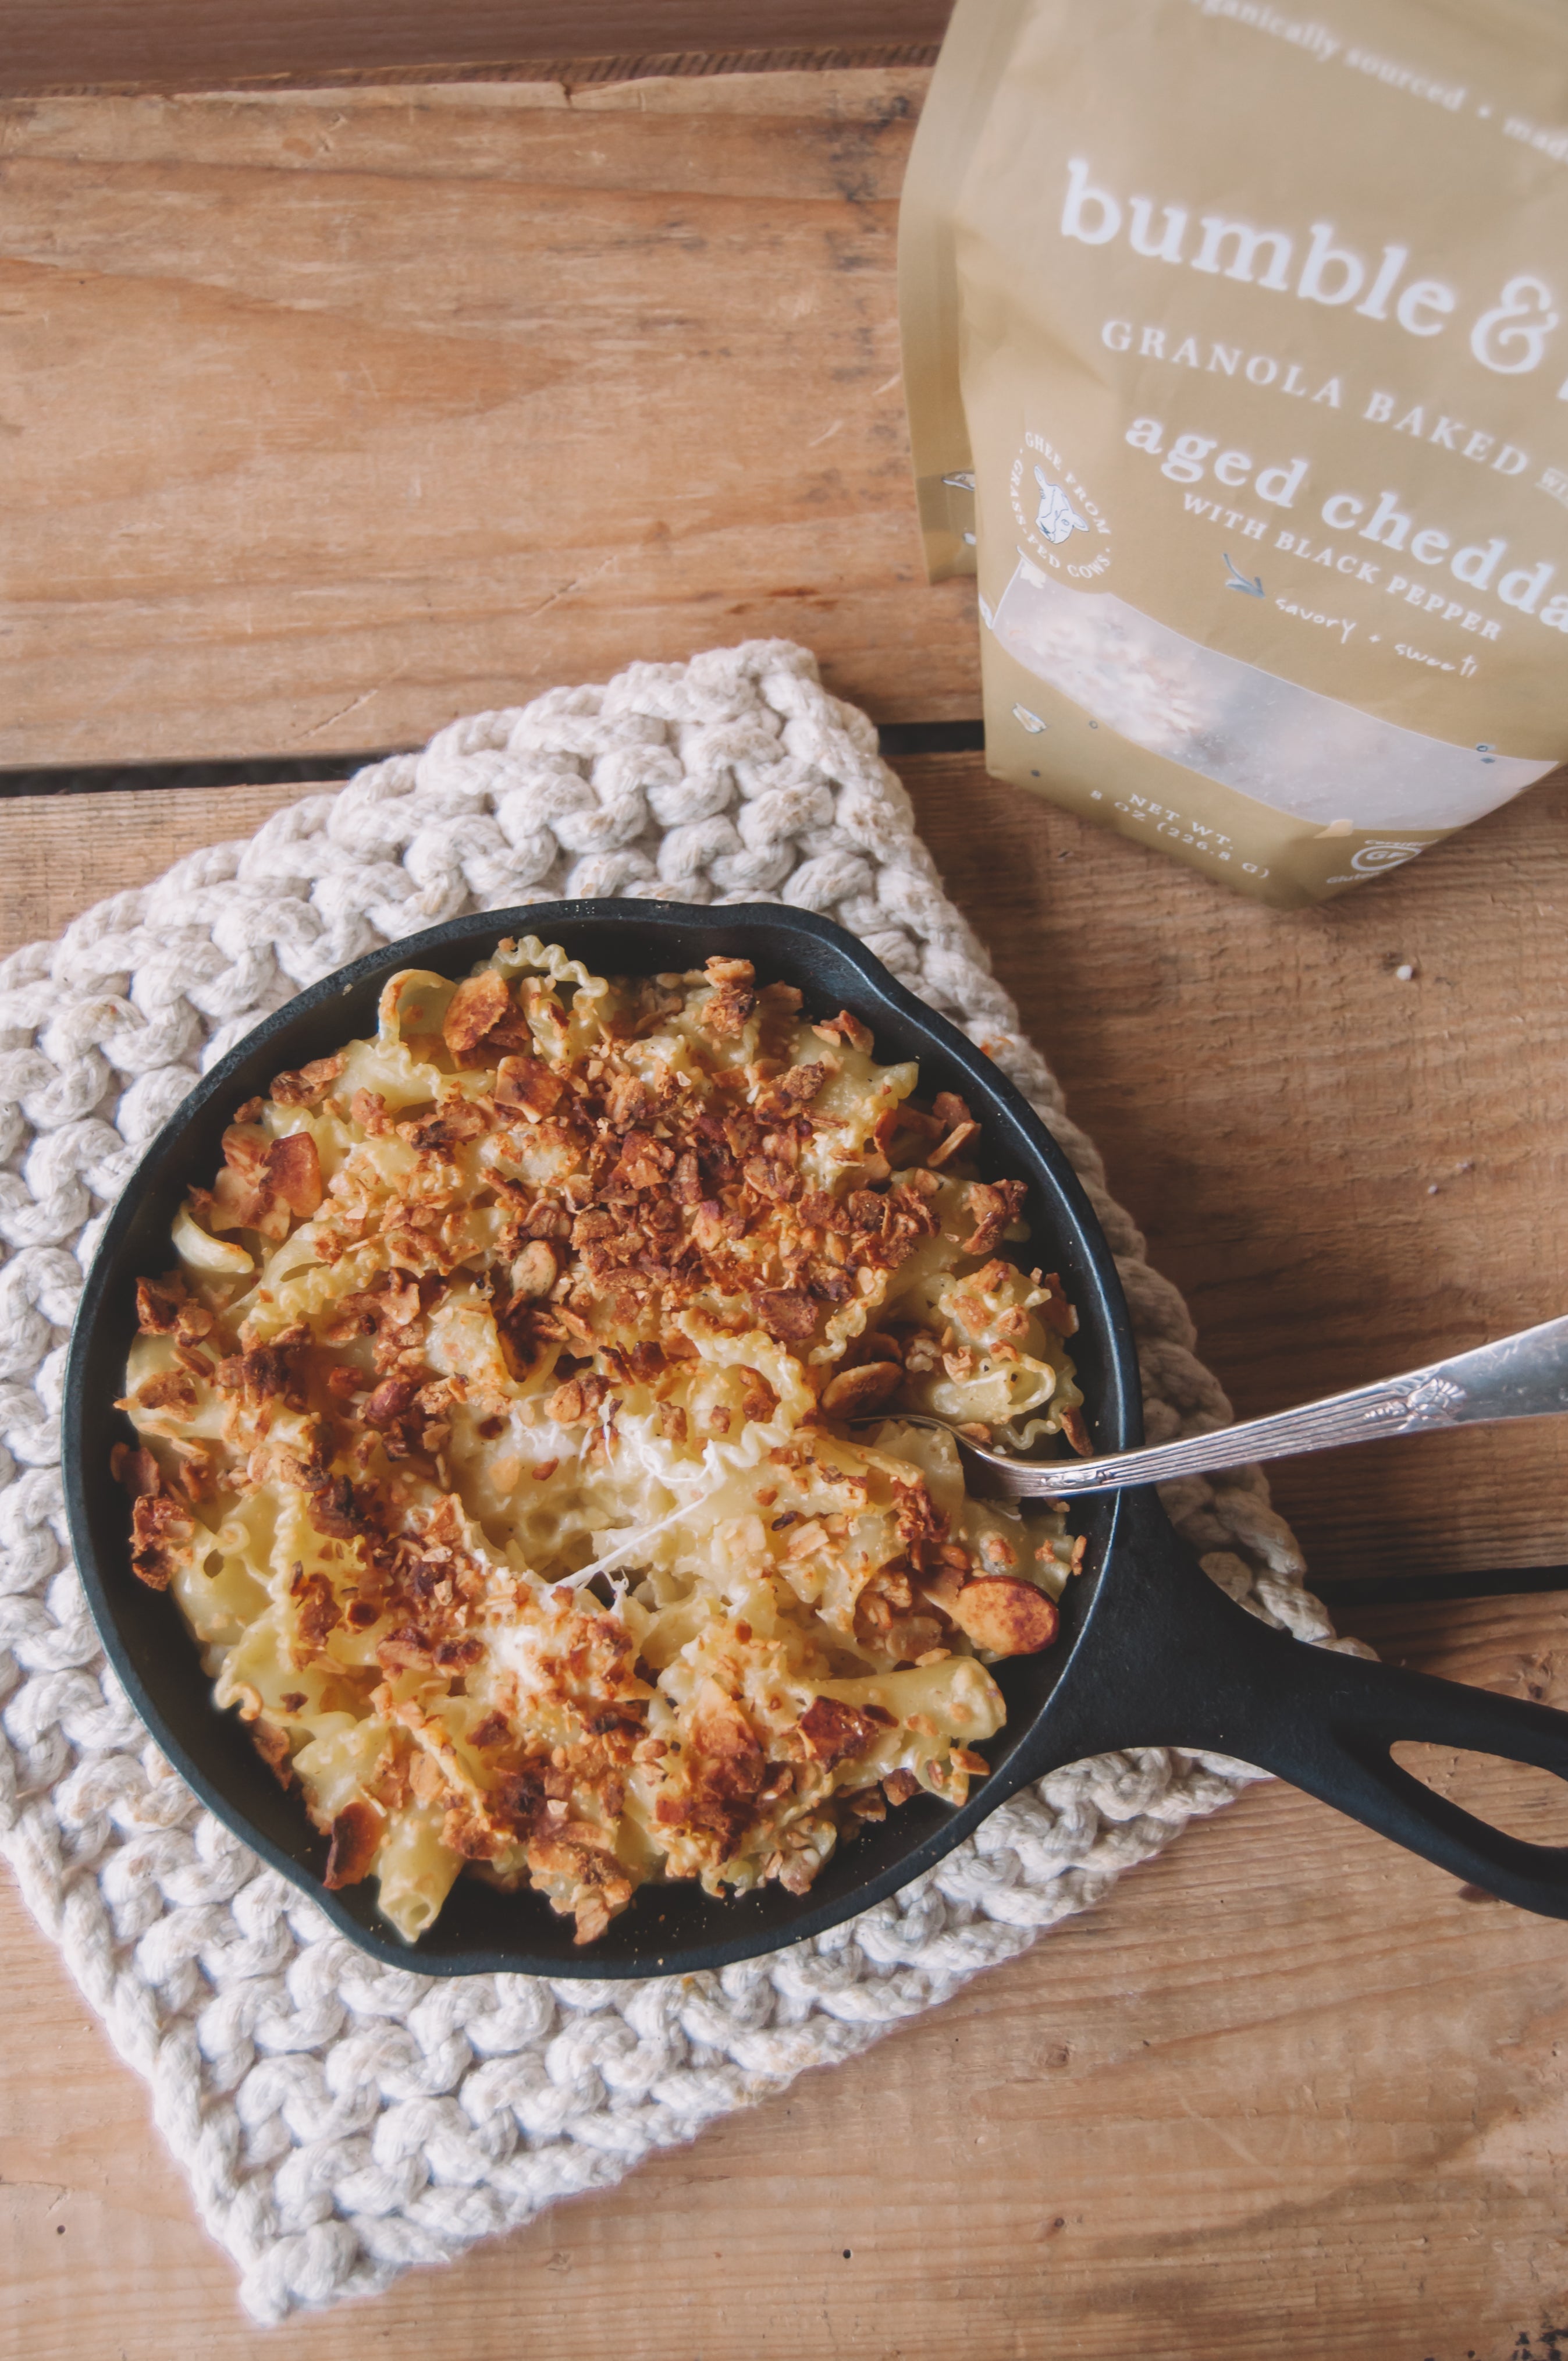 Jamie's Farm Granola - Gluten-Free Crumb Topping Replacement for Panko Crumbs, baked onto Mac & Cheese with Gruyere in a Cast Iron Skillet